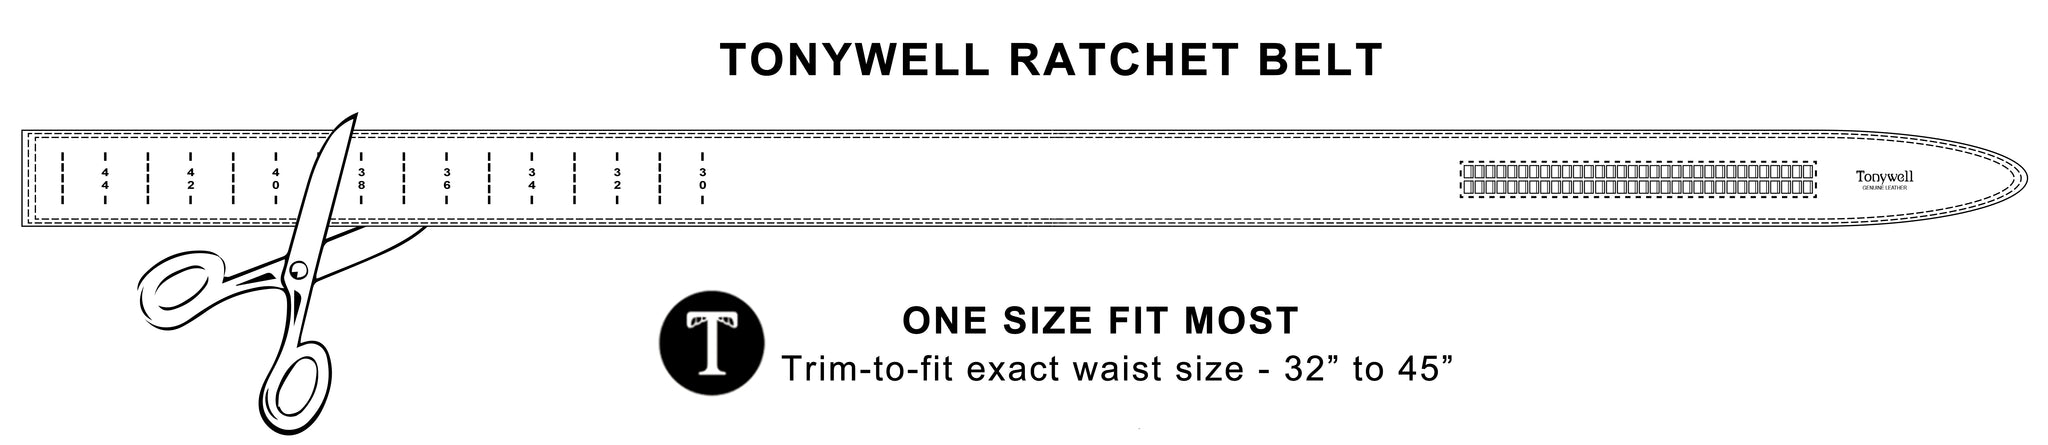 How to cut to fit men's ratchet belt Tonywell